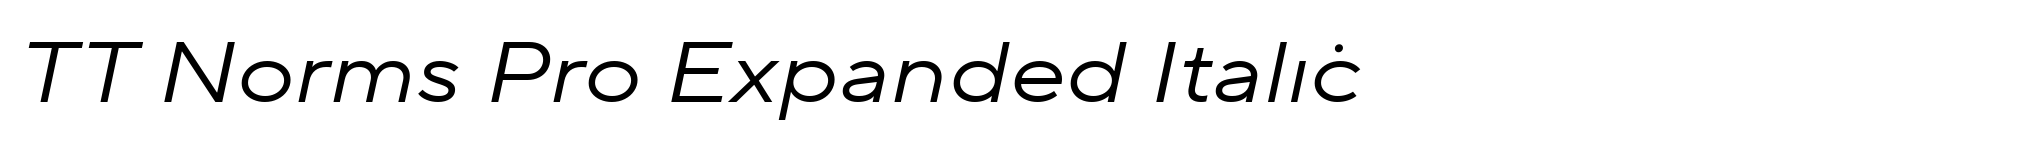 TT Norms Pro Expanded Italic image